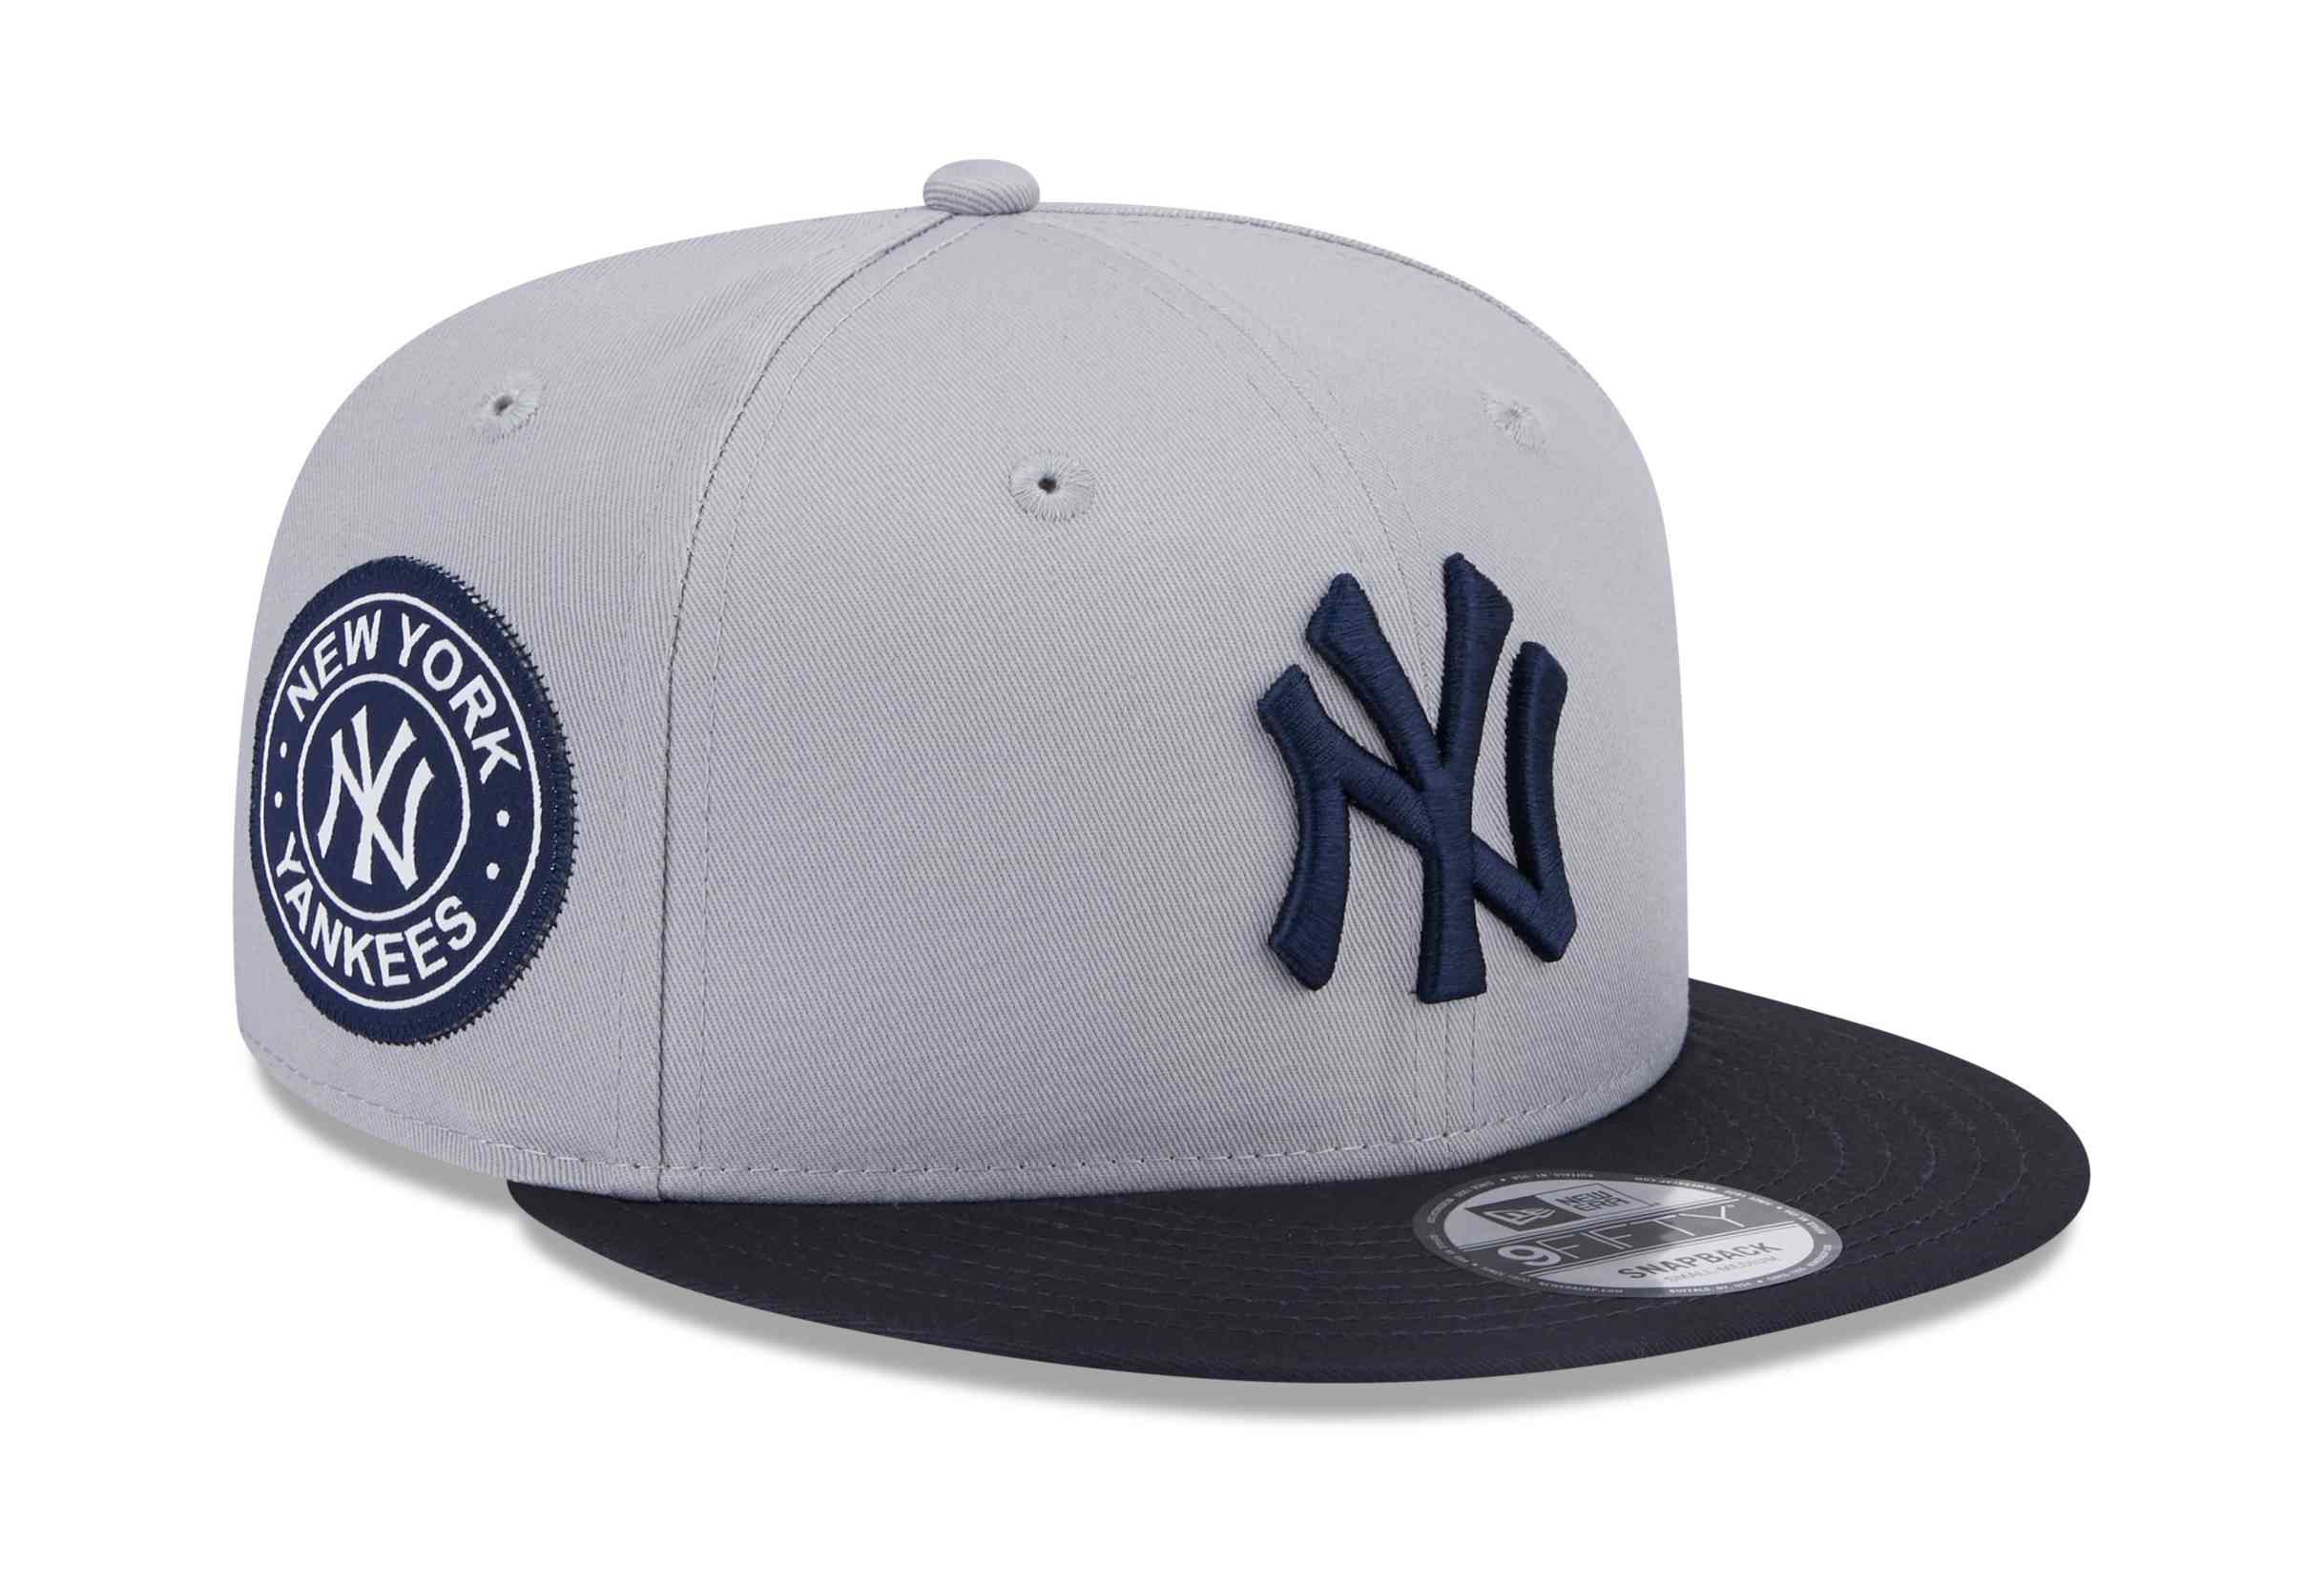 New Era - MLB New York Yankees Contrast Side Patch 9Fifty Snapback Cap